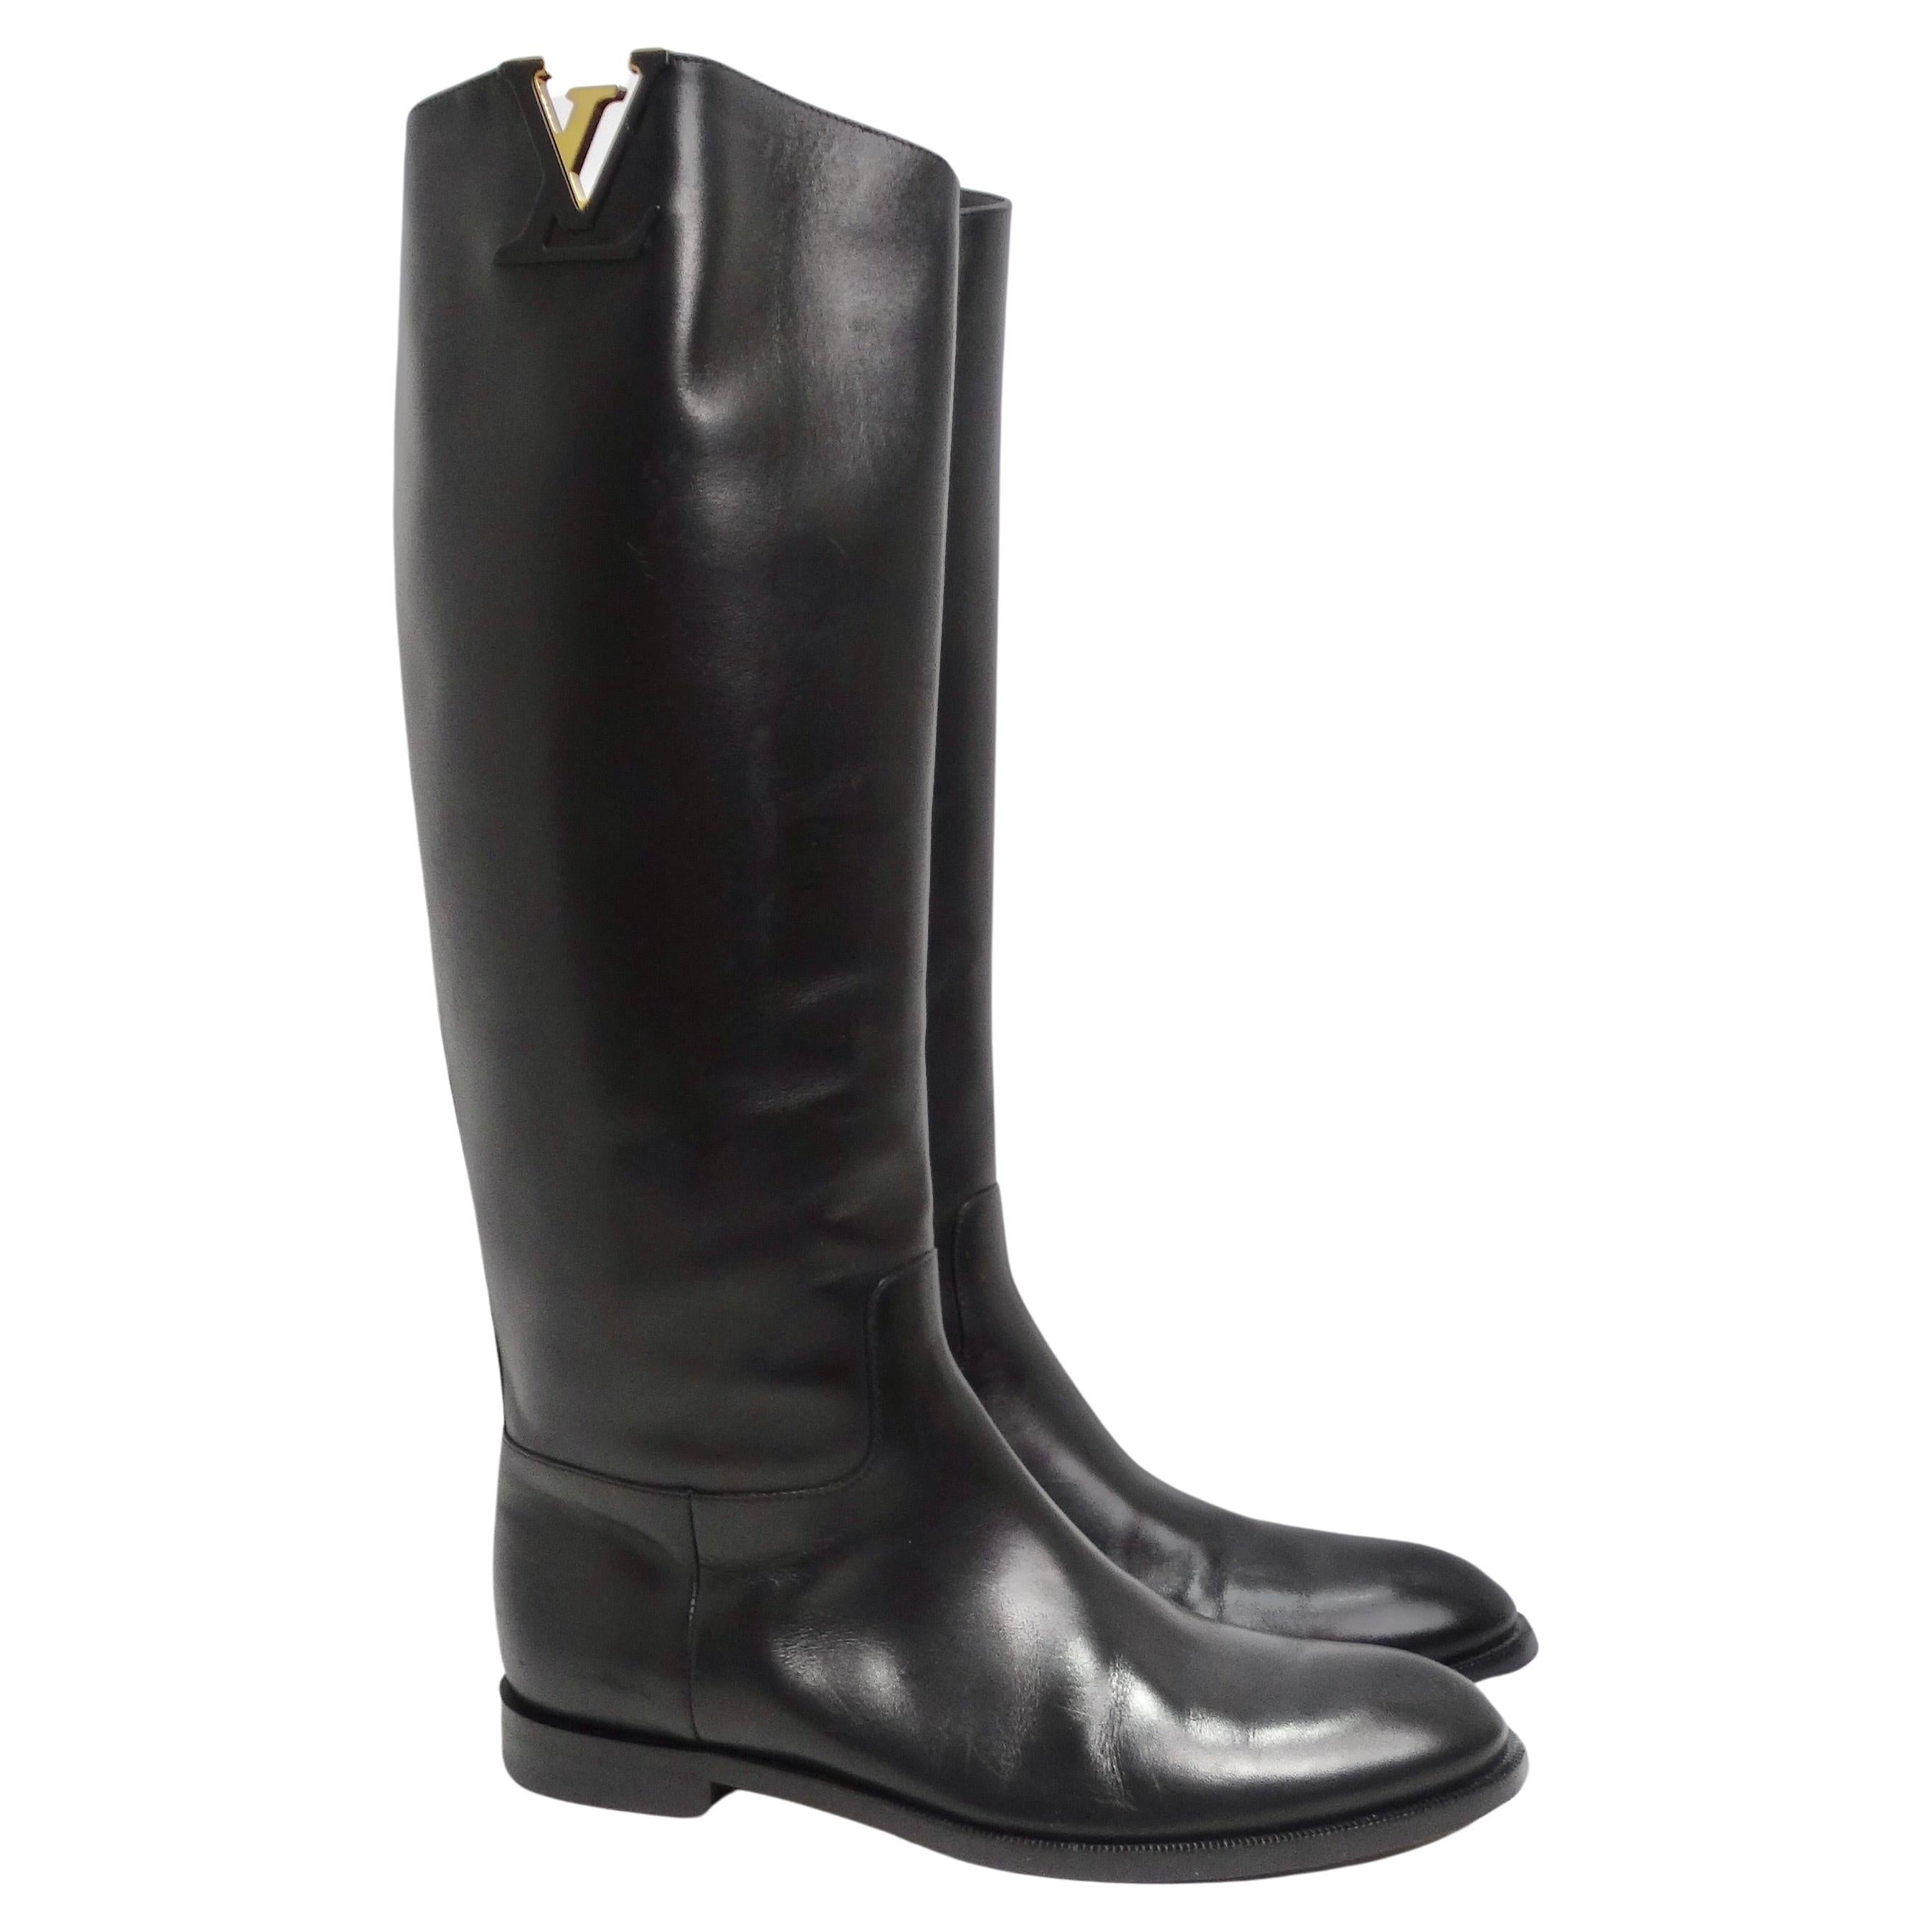  Louis Vuitton Heritage Black Leather Riding Boots